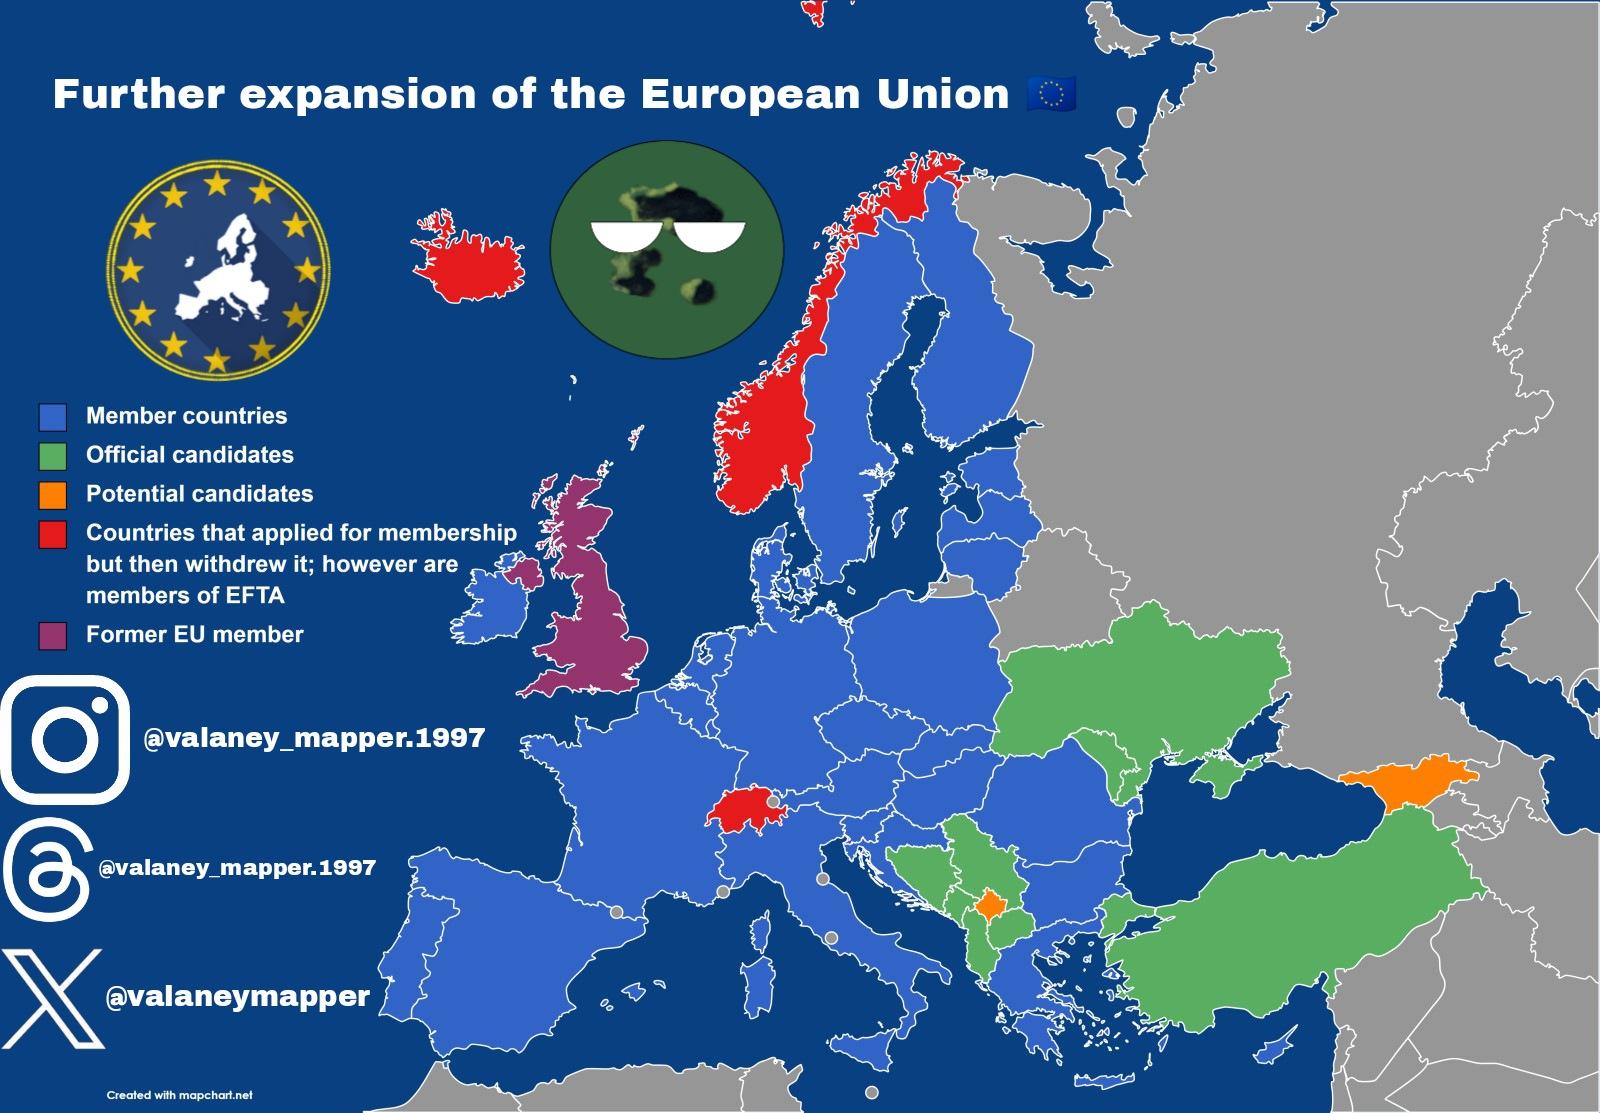 Bulgaria Is Against The Division Of Albania And The Republic Of Northern Macedonia Into The EU Accession Process